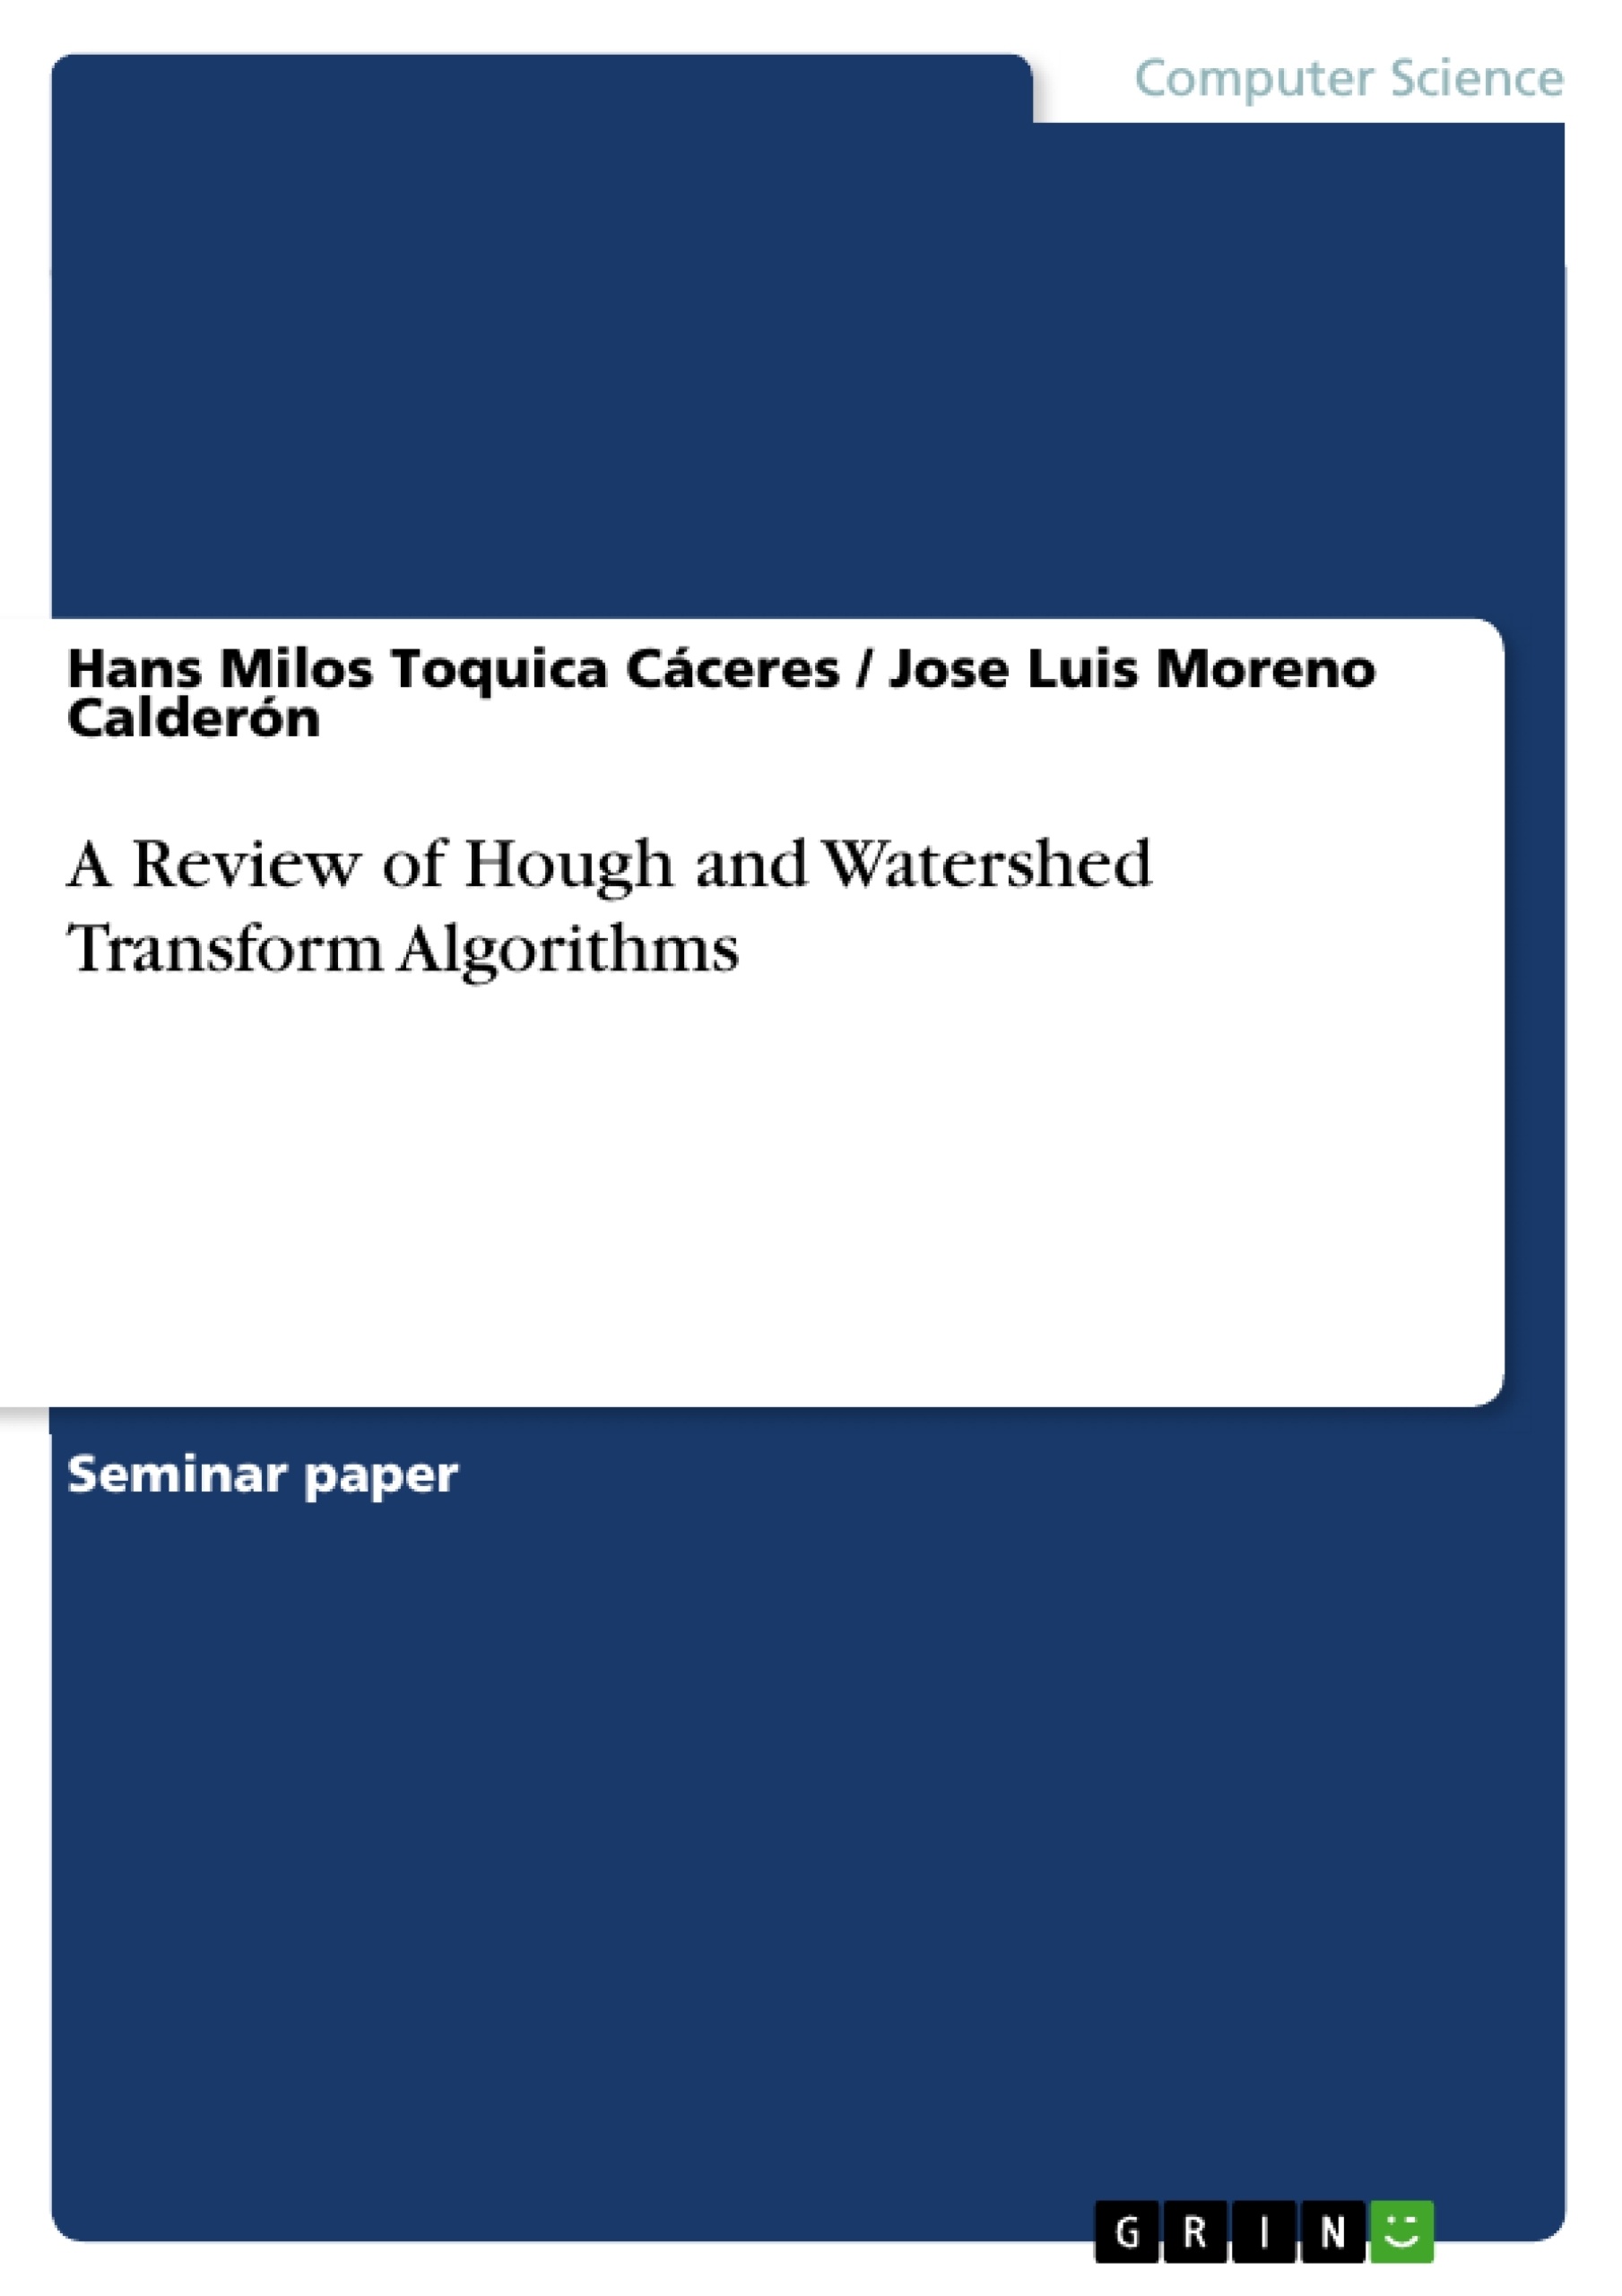 Título: A Review of Hough and Watershed Transform Algorithms